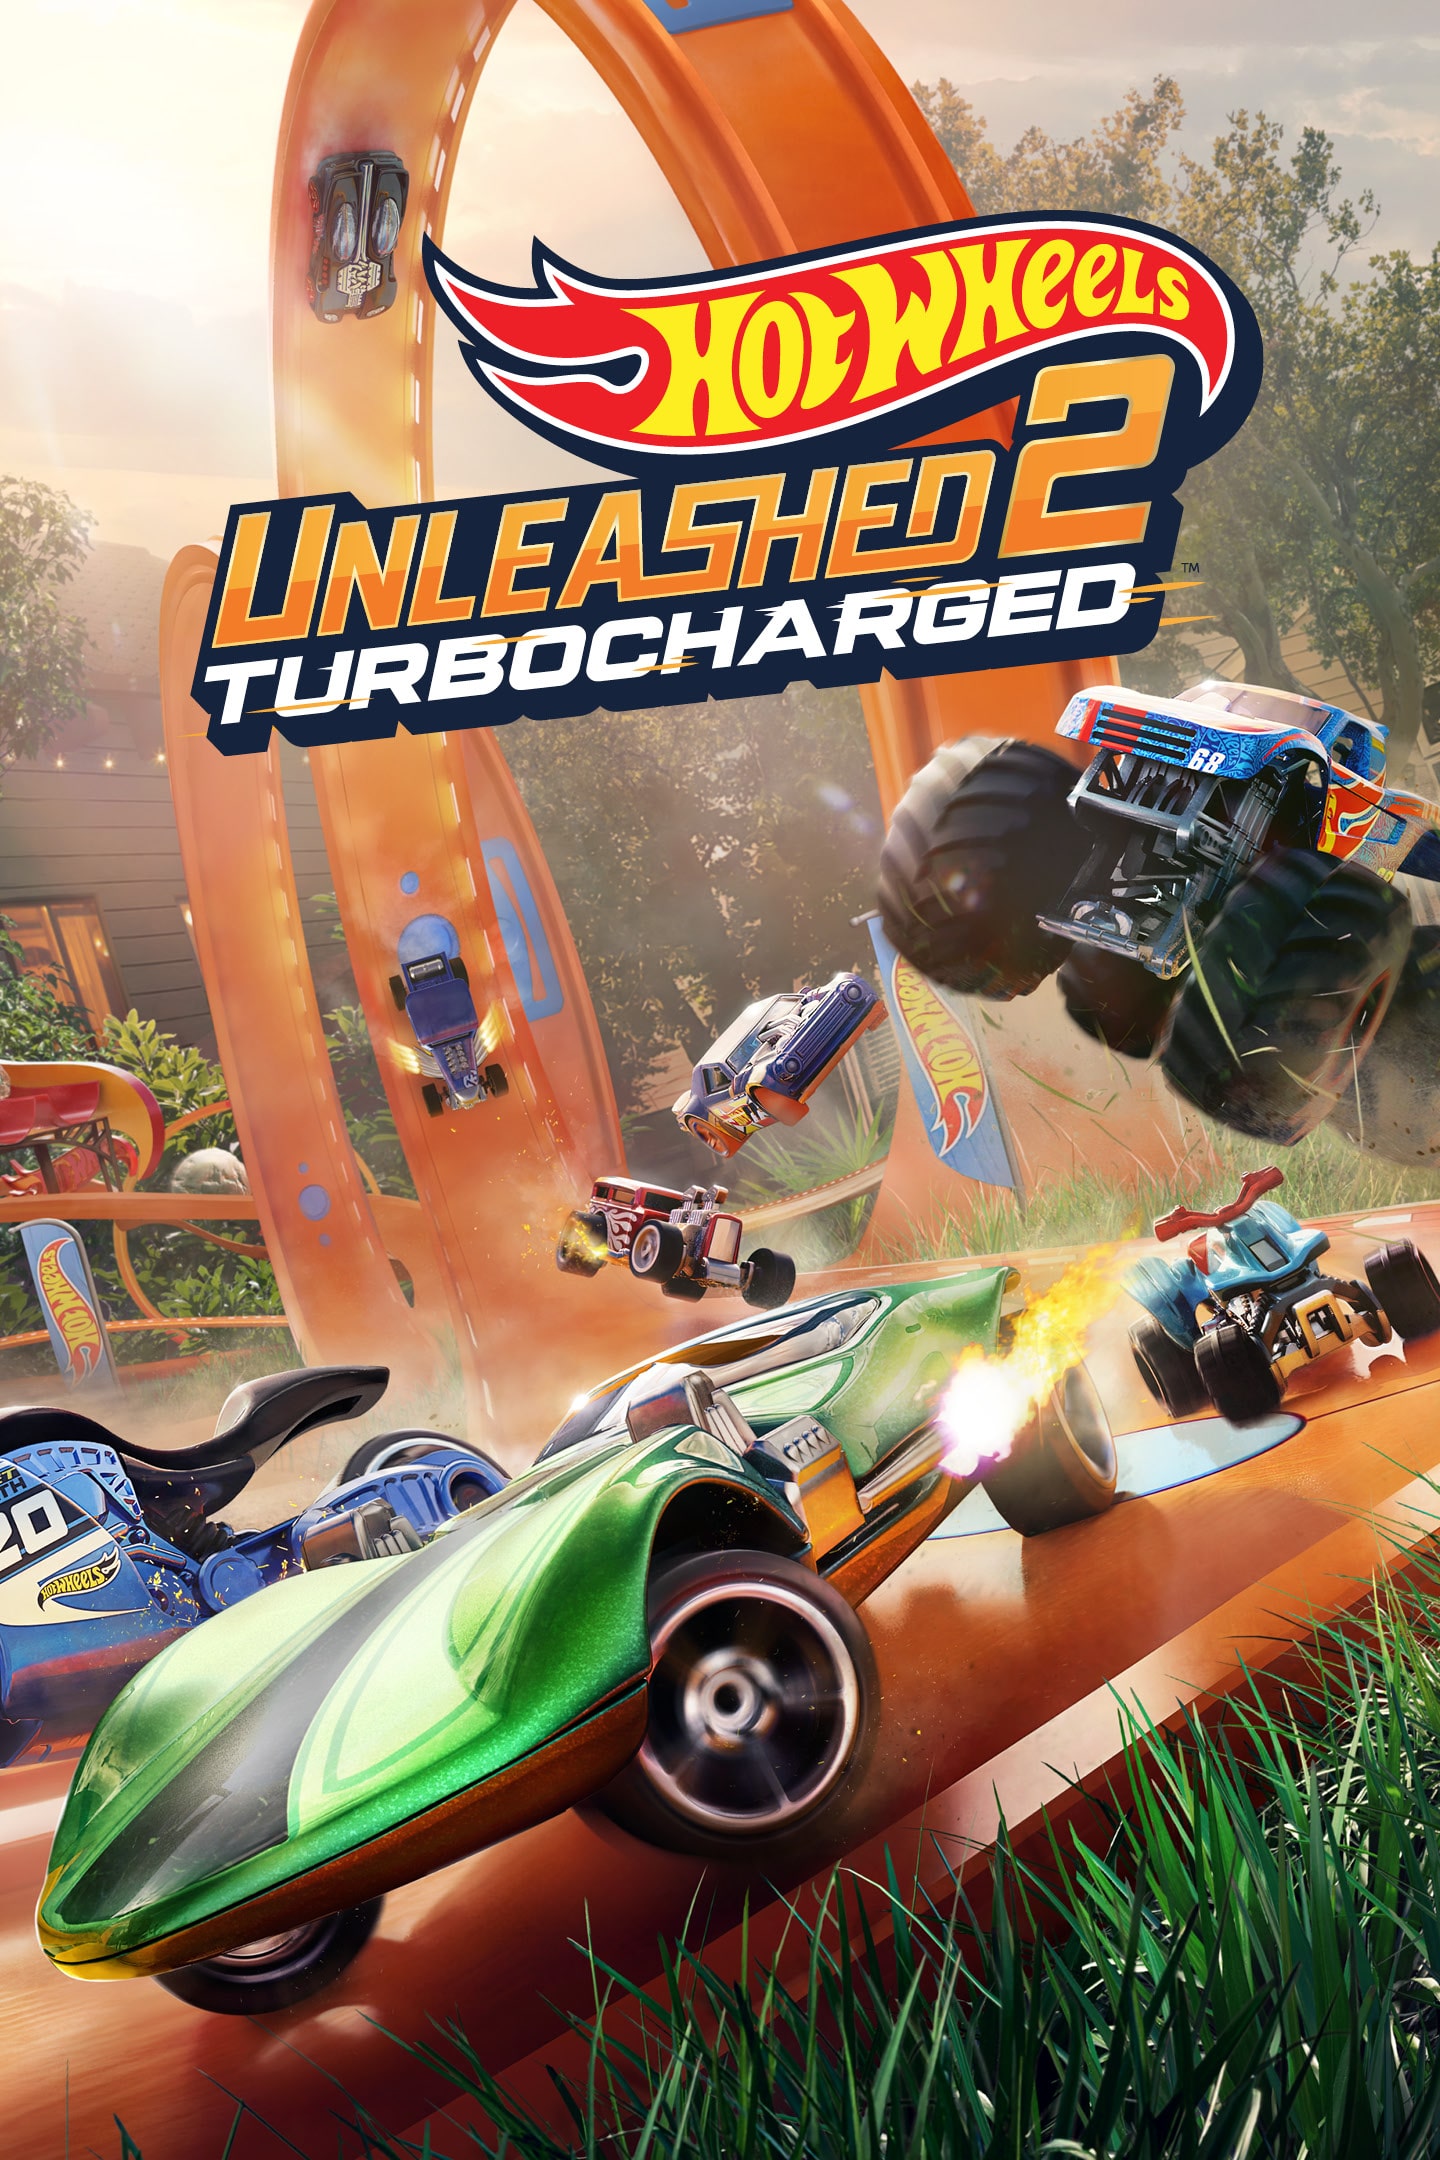 UNLEASHED™ Turbocharged - PS4 Edition WHEELS & 2 PS5 - HOT Deluxe